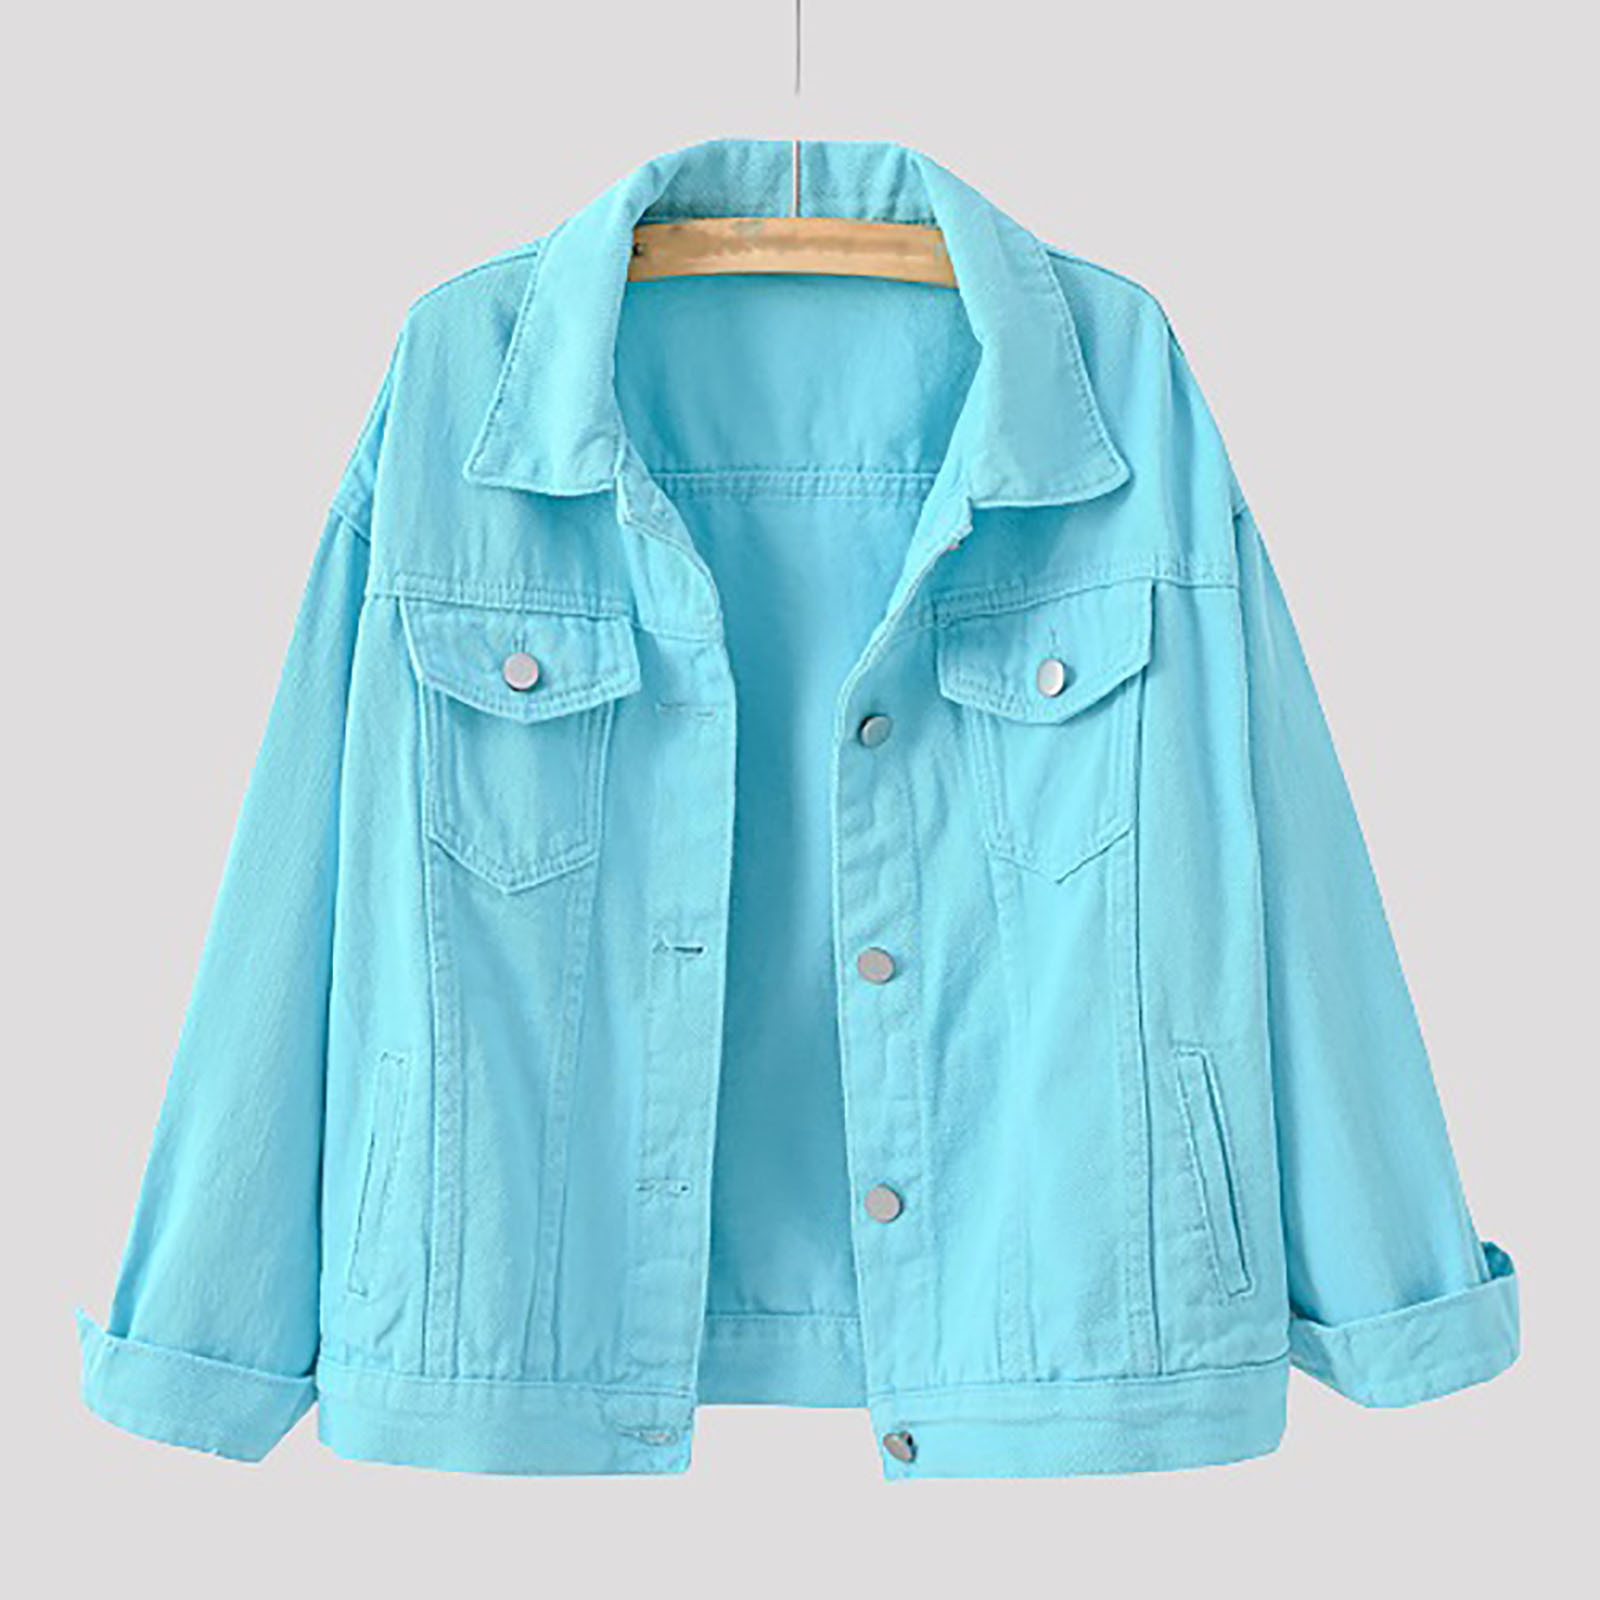 2023 Women's Button Down Jean Denim Jackets Lapel Casual Shackets Solid Classic Denim Coat Outerwear Autumn Spring Womens Clothes - image 2 of 4